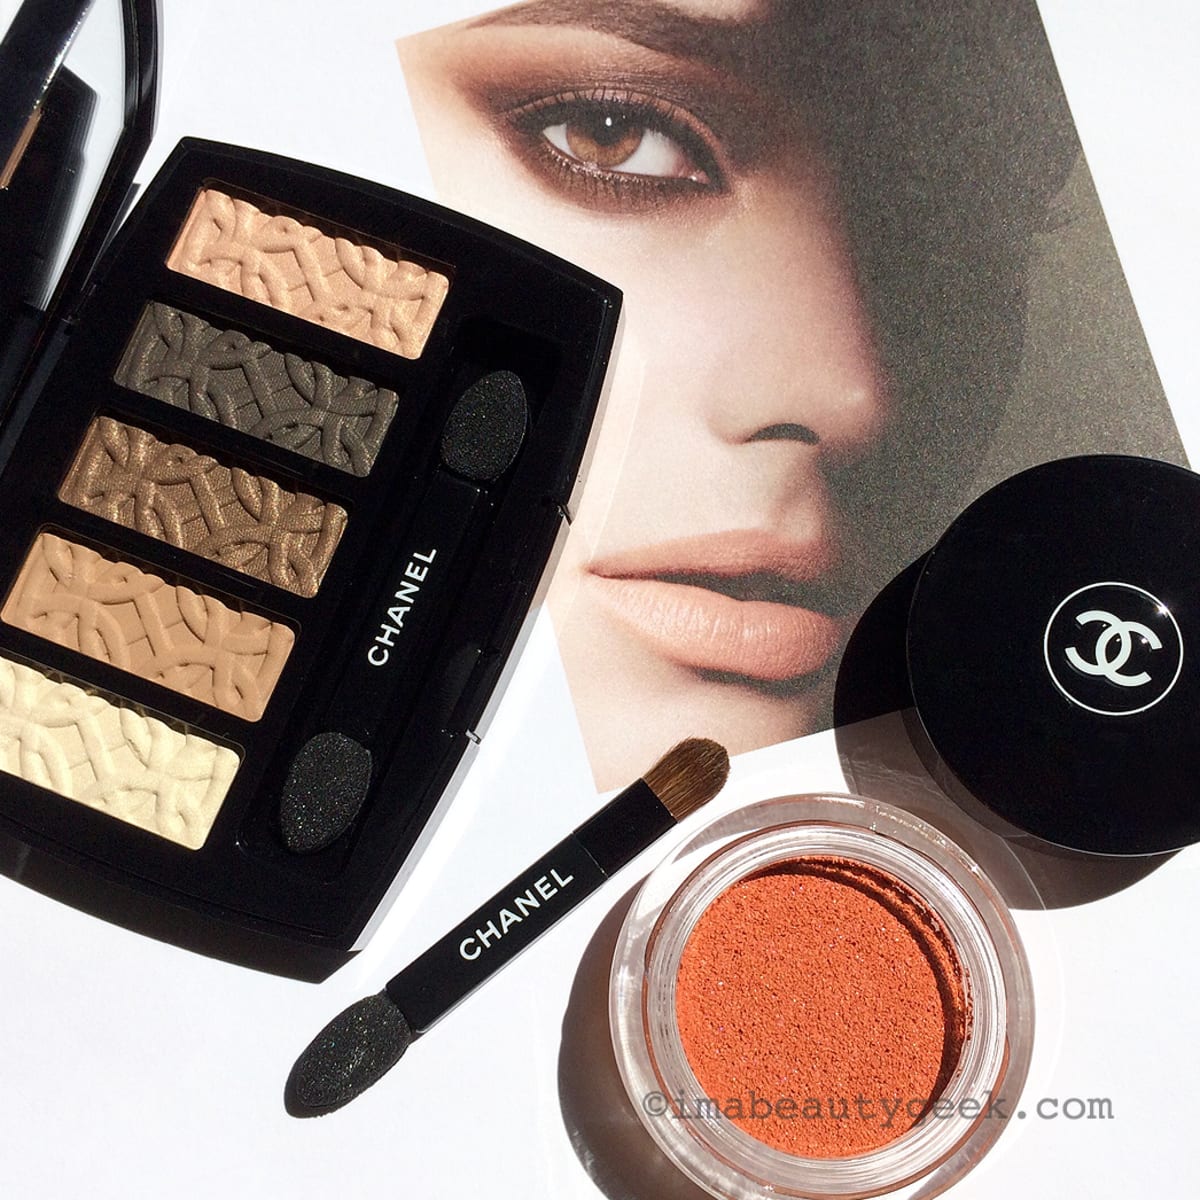 CHANEL FALL 2015 MAKEUP: LES AUTOMNALES COLLECTION - Beautygeeks